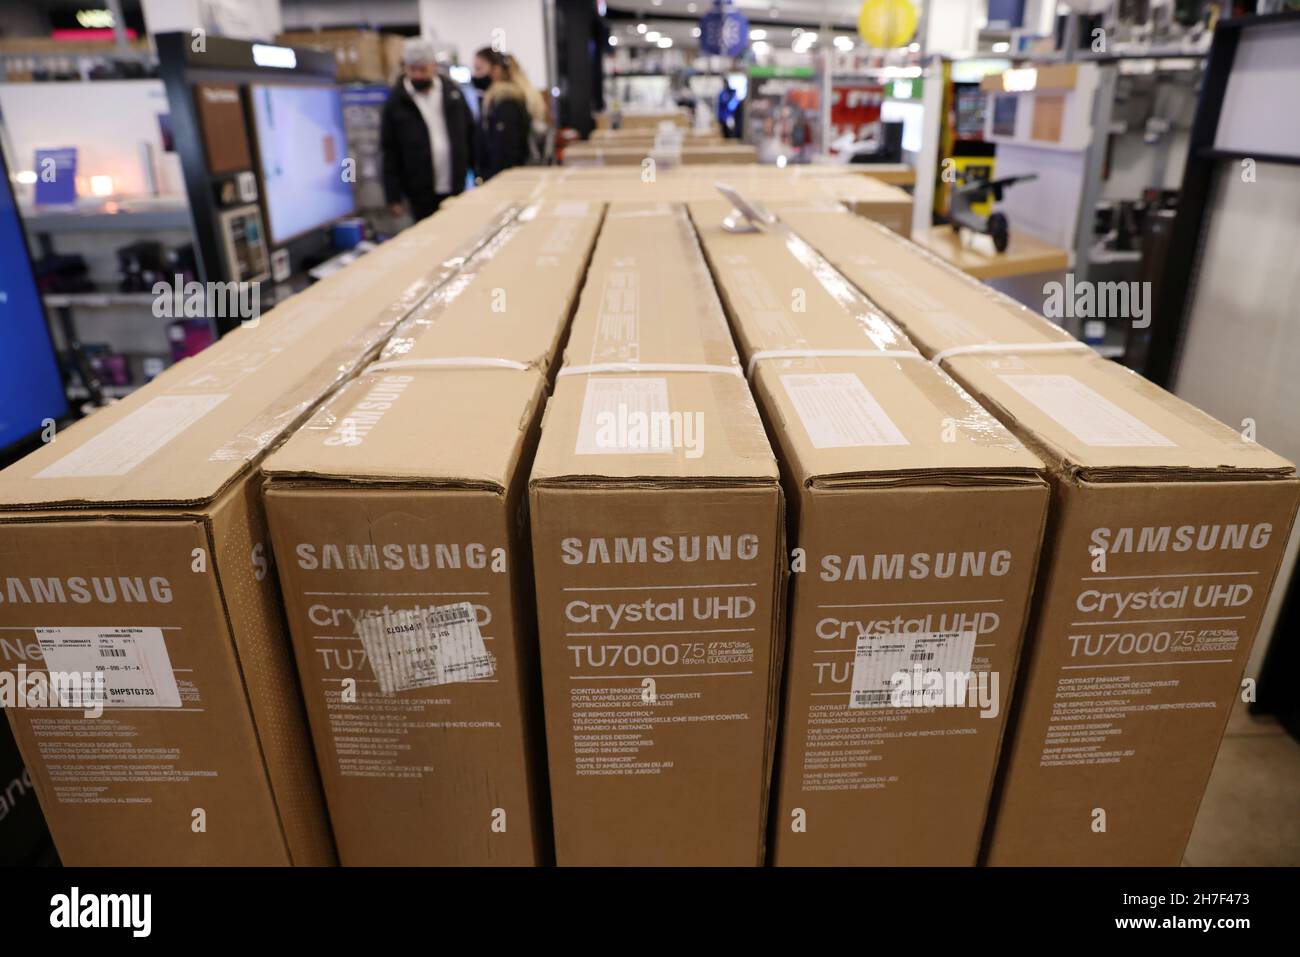 Boxes containing Samsung televisions are seen in a store in Manhattan, New York City, U.S., November 22, 2021. REUTERS/Andrew Kelly Stock Photo